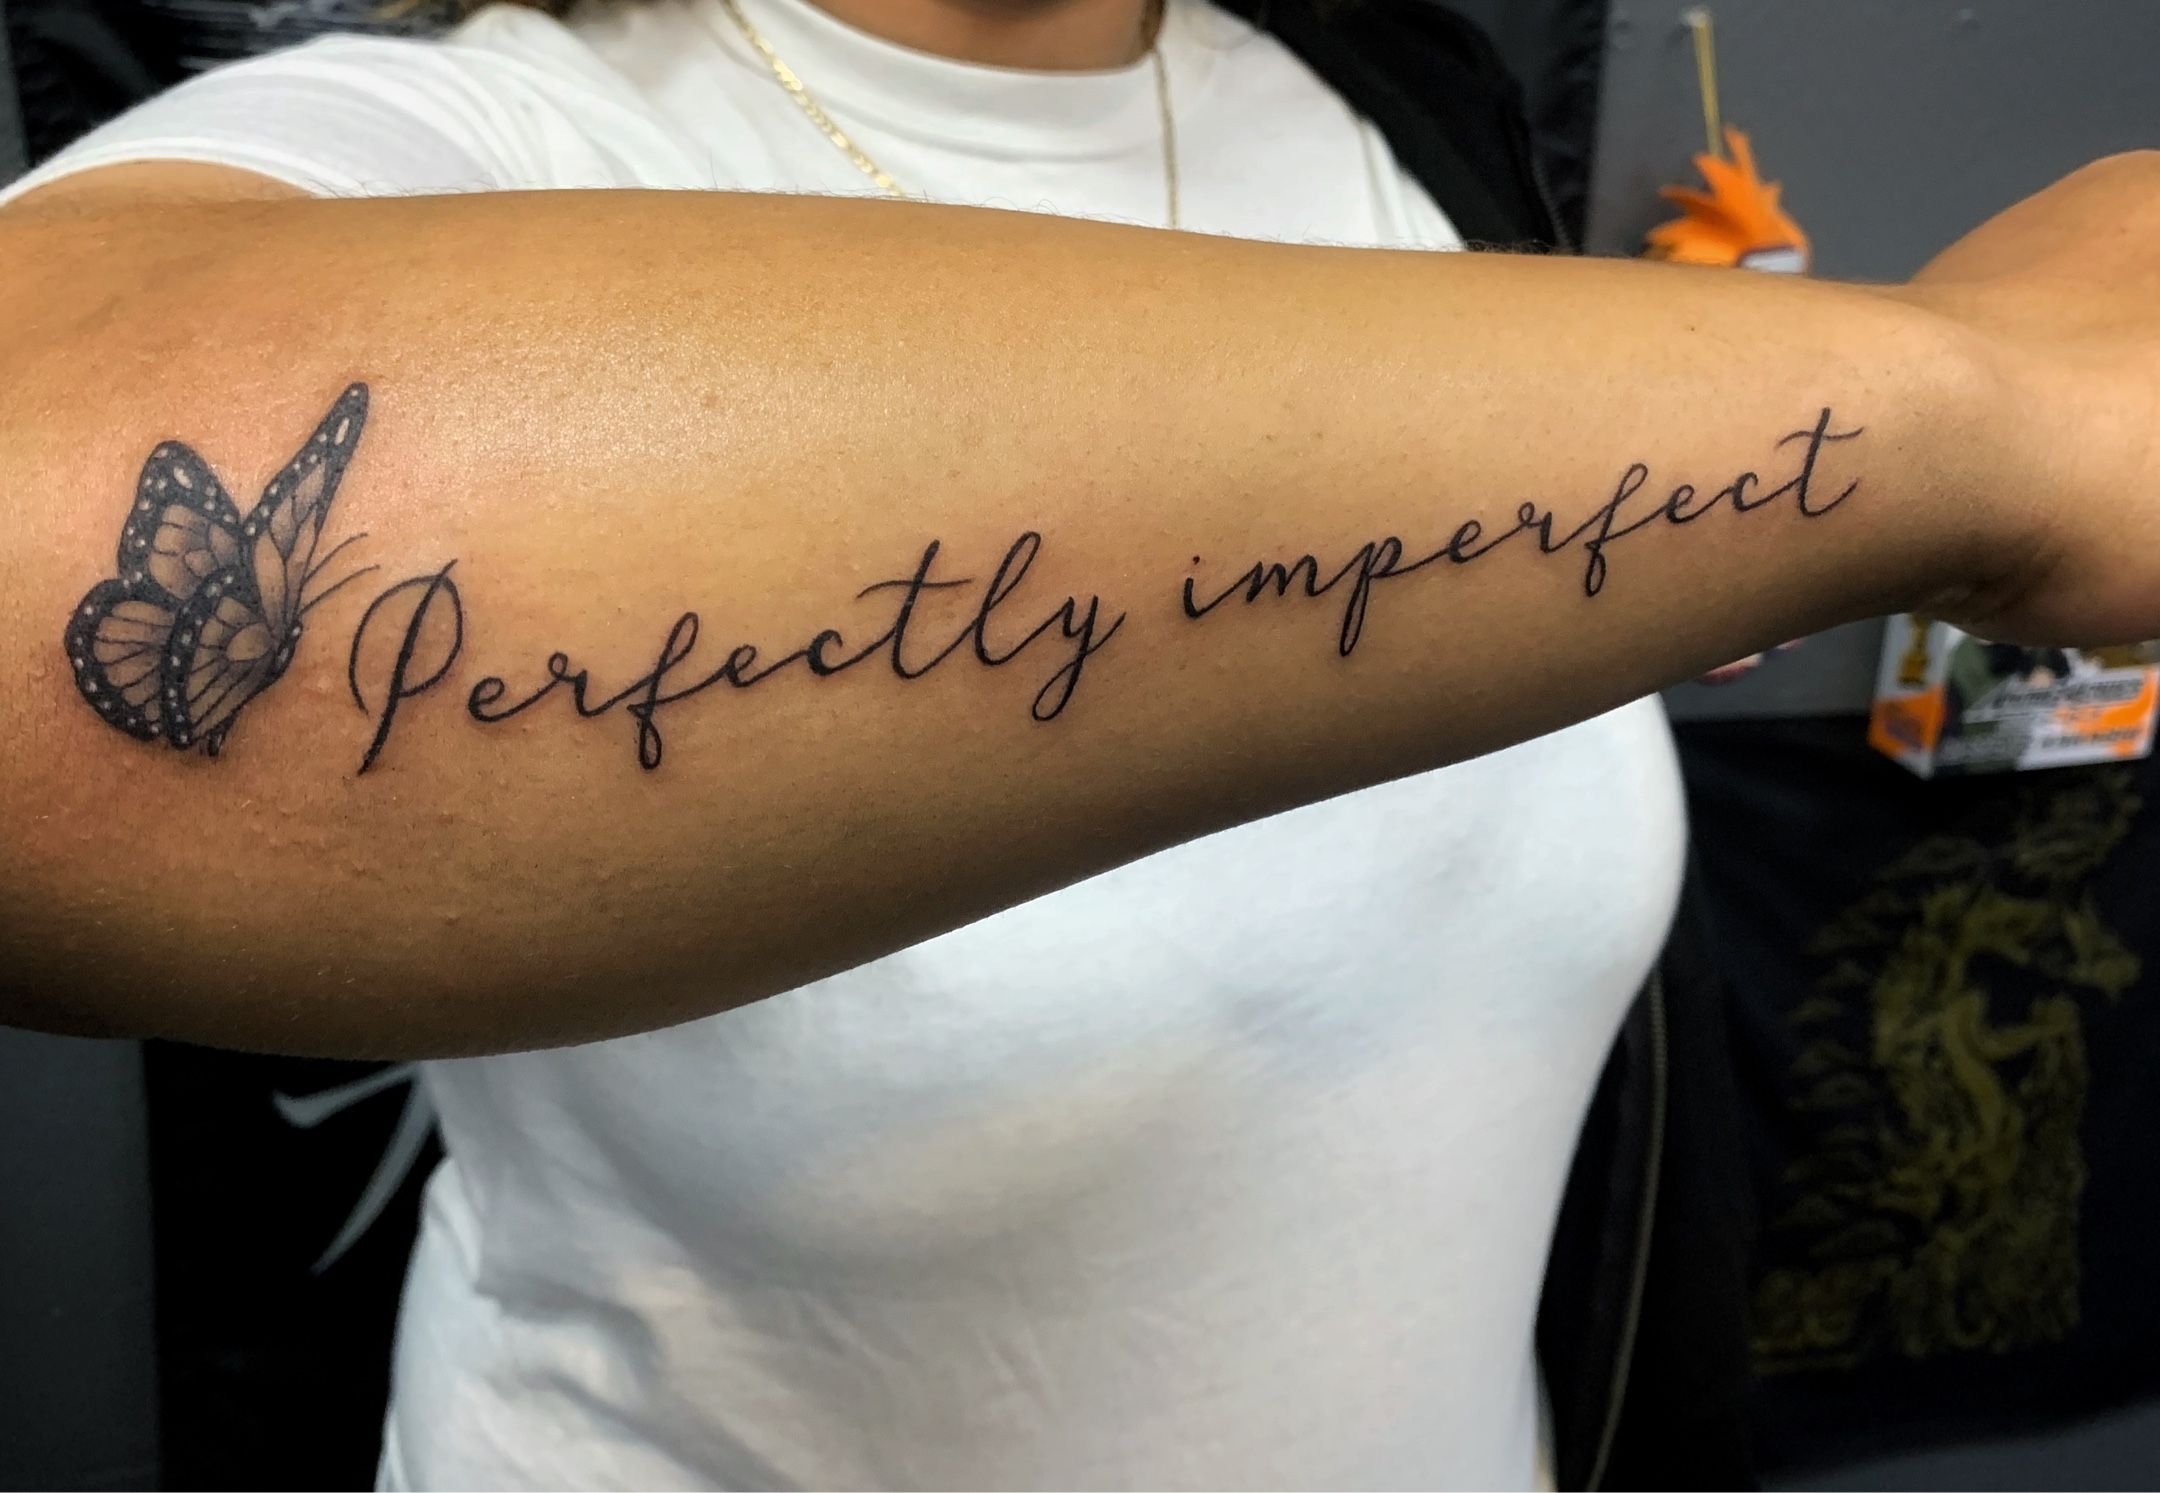 Perfectly Imperfect Tattoo in Cursive